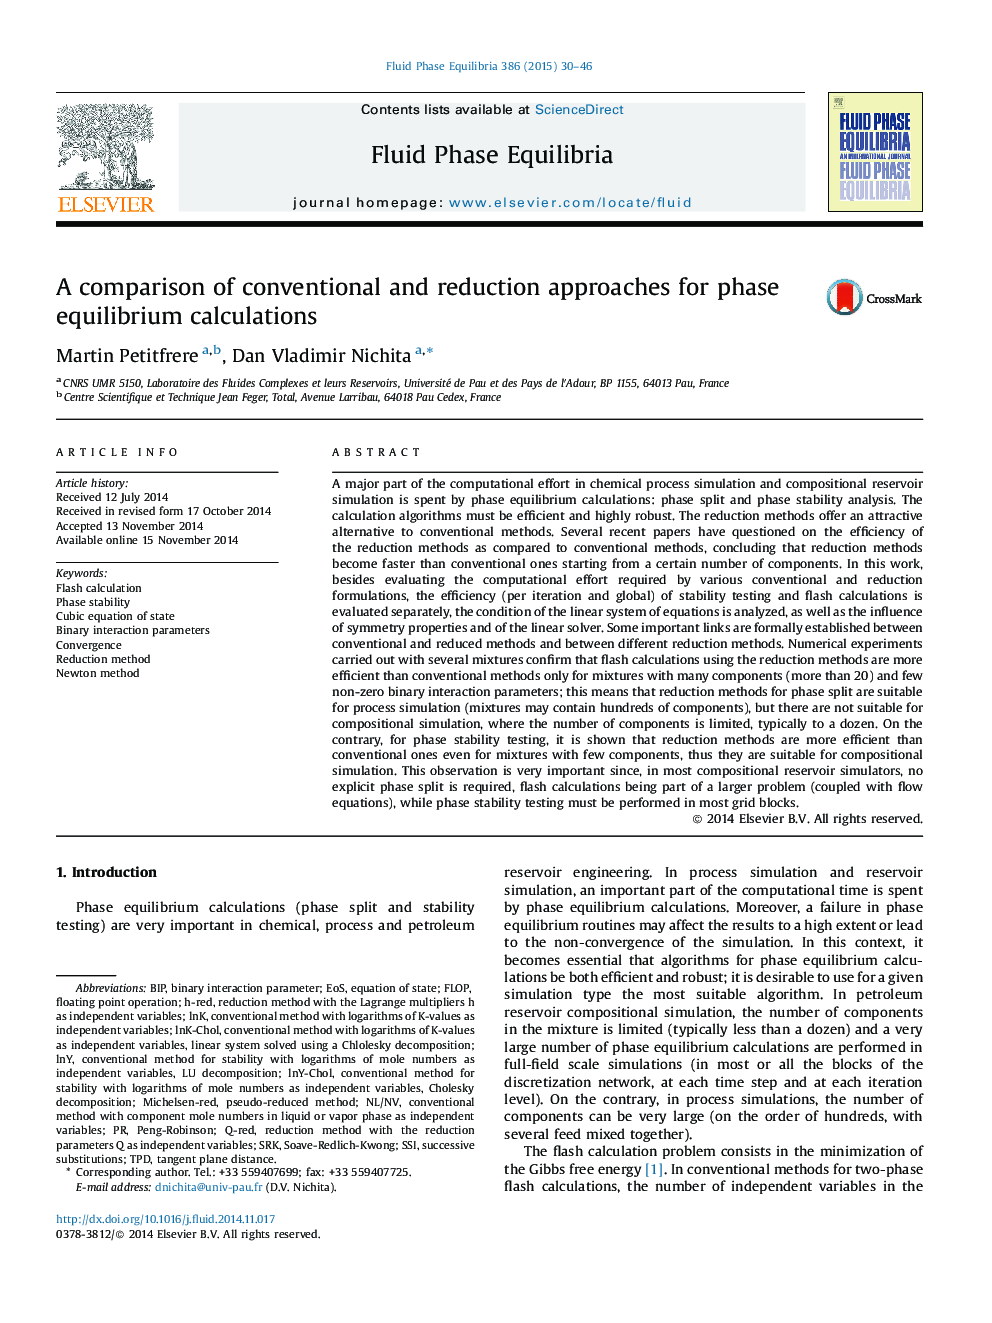 A comparison of conventional and reduction approaches for phase equilibrium calculations